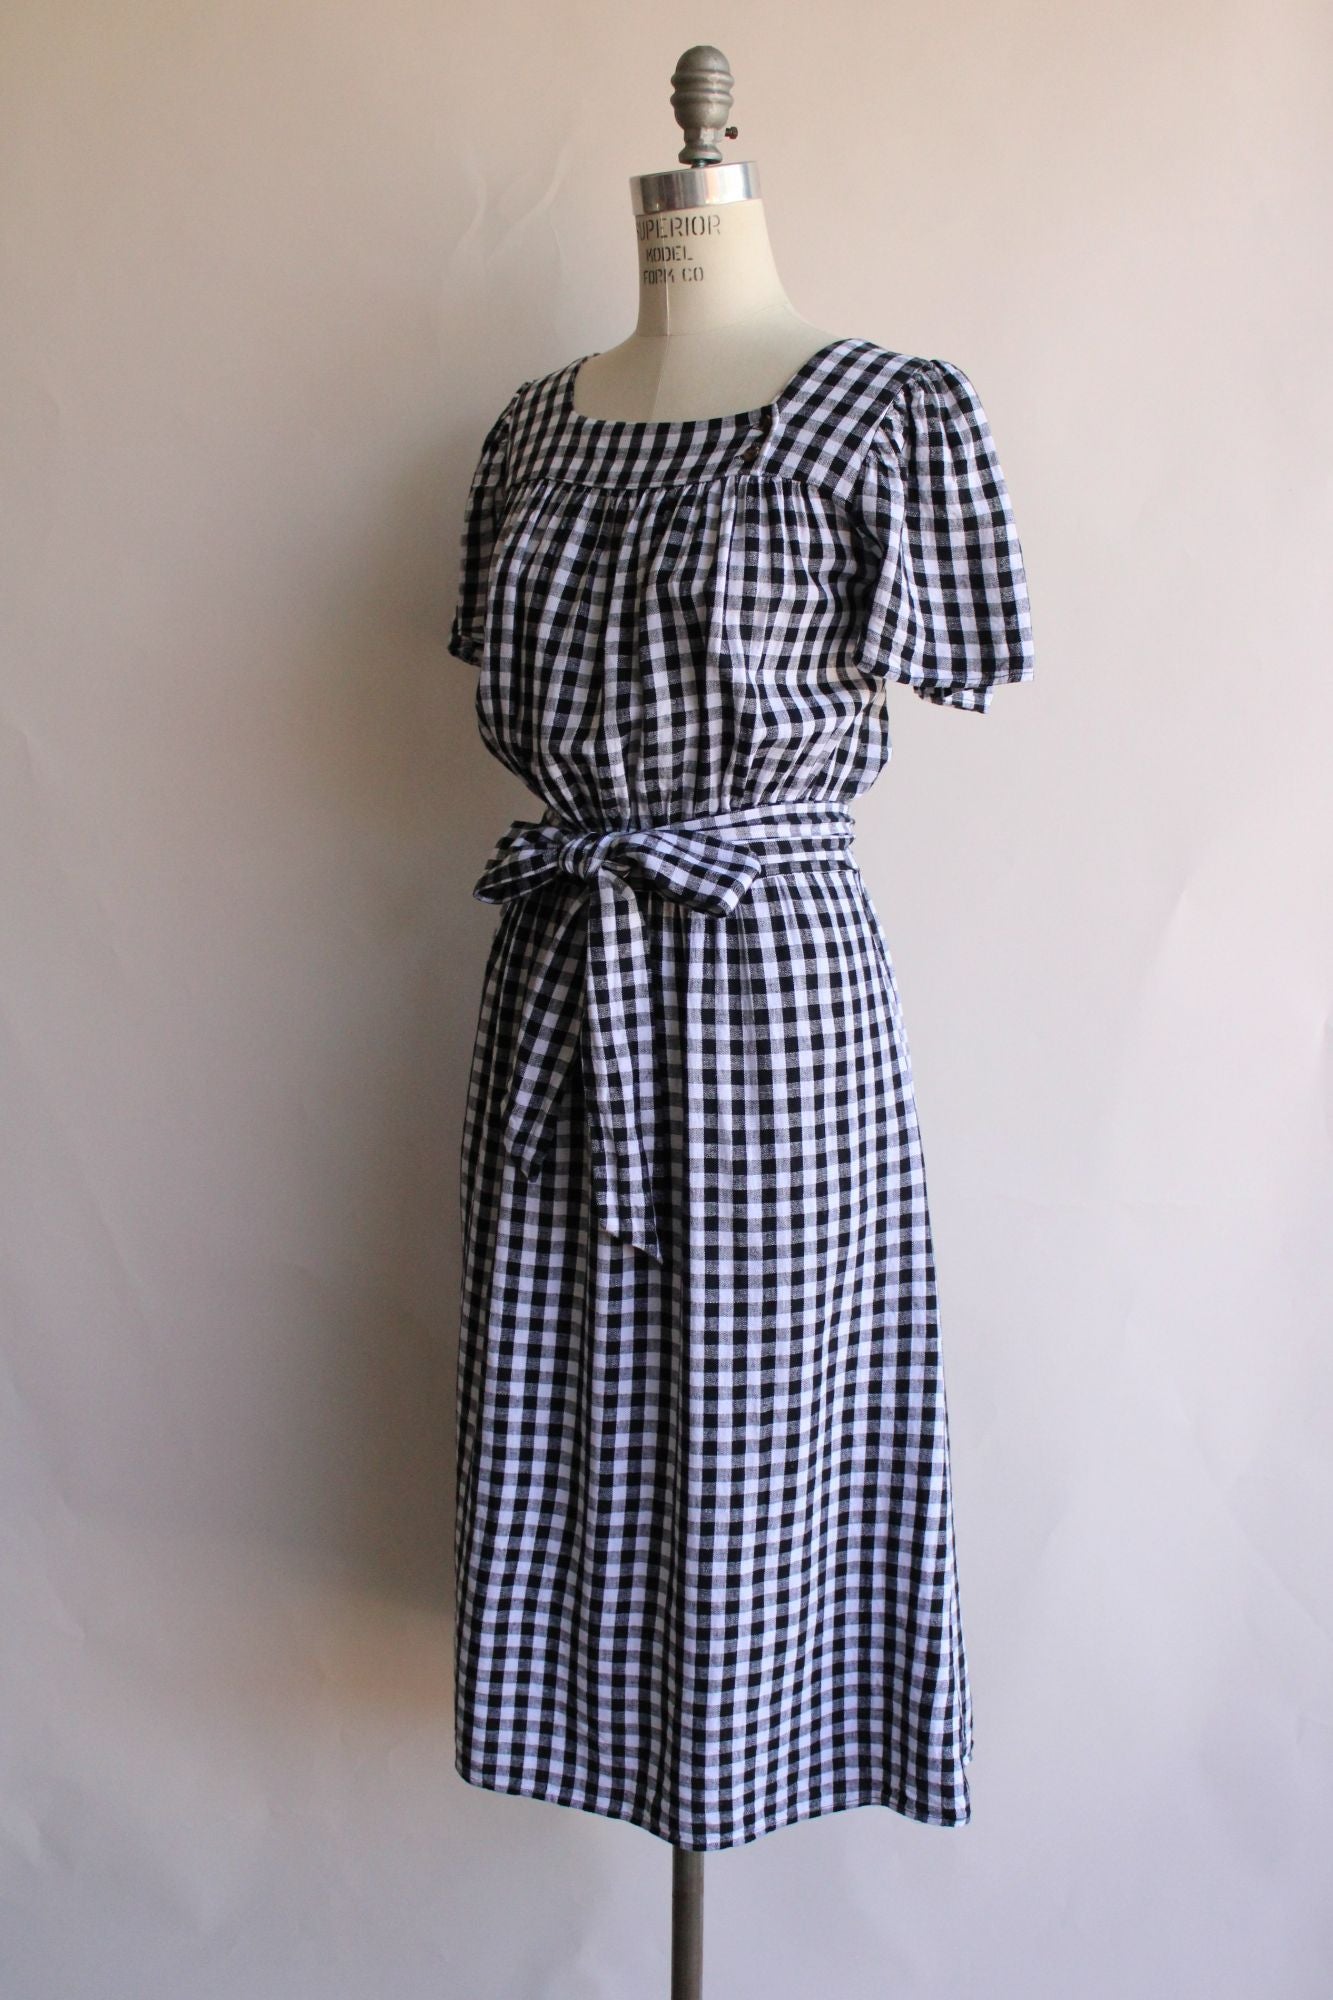 Who What Wear Womens Dress, Size Medium, Black and White Gingham, Belt and Pockets